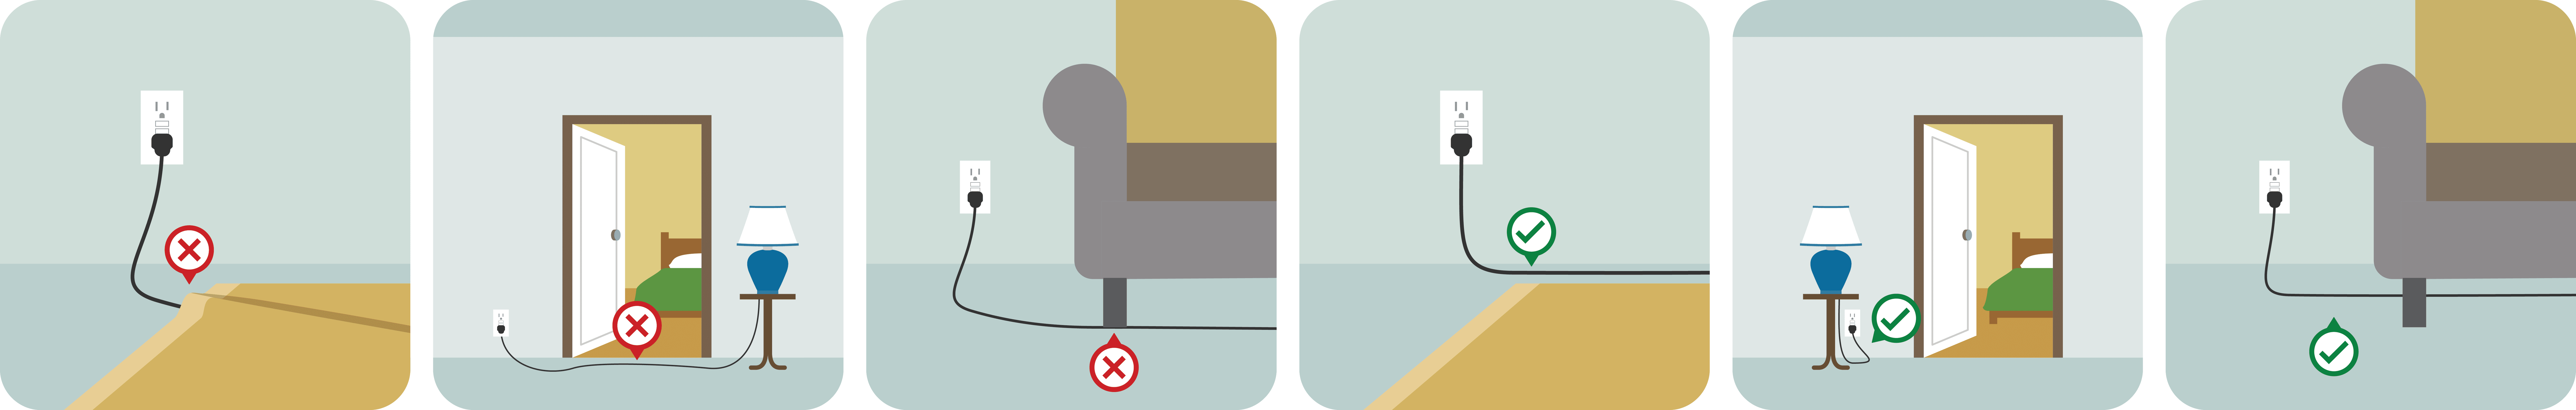 Avoid Putting Cords Under Rugs And Carpets, Extension Cord Under Rug